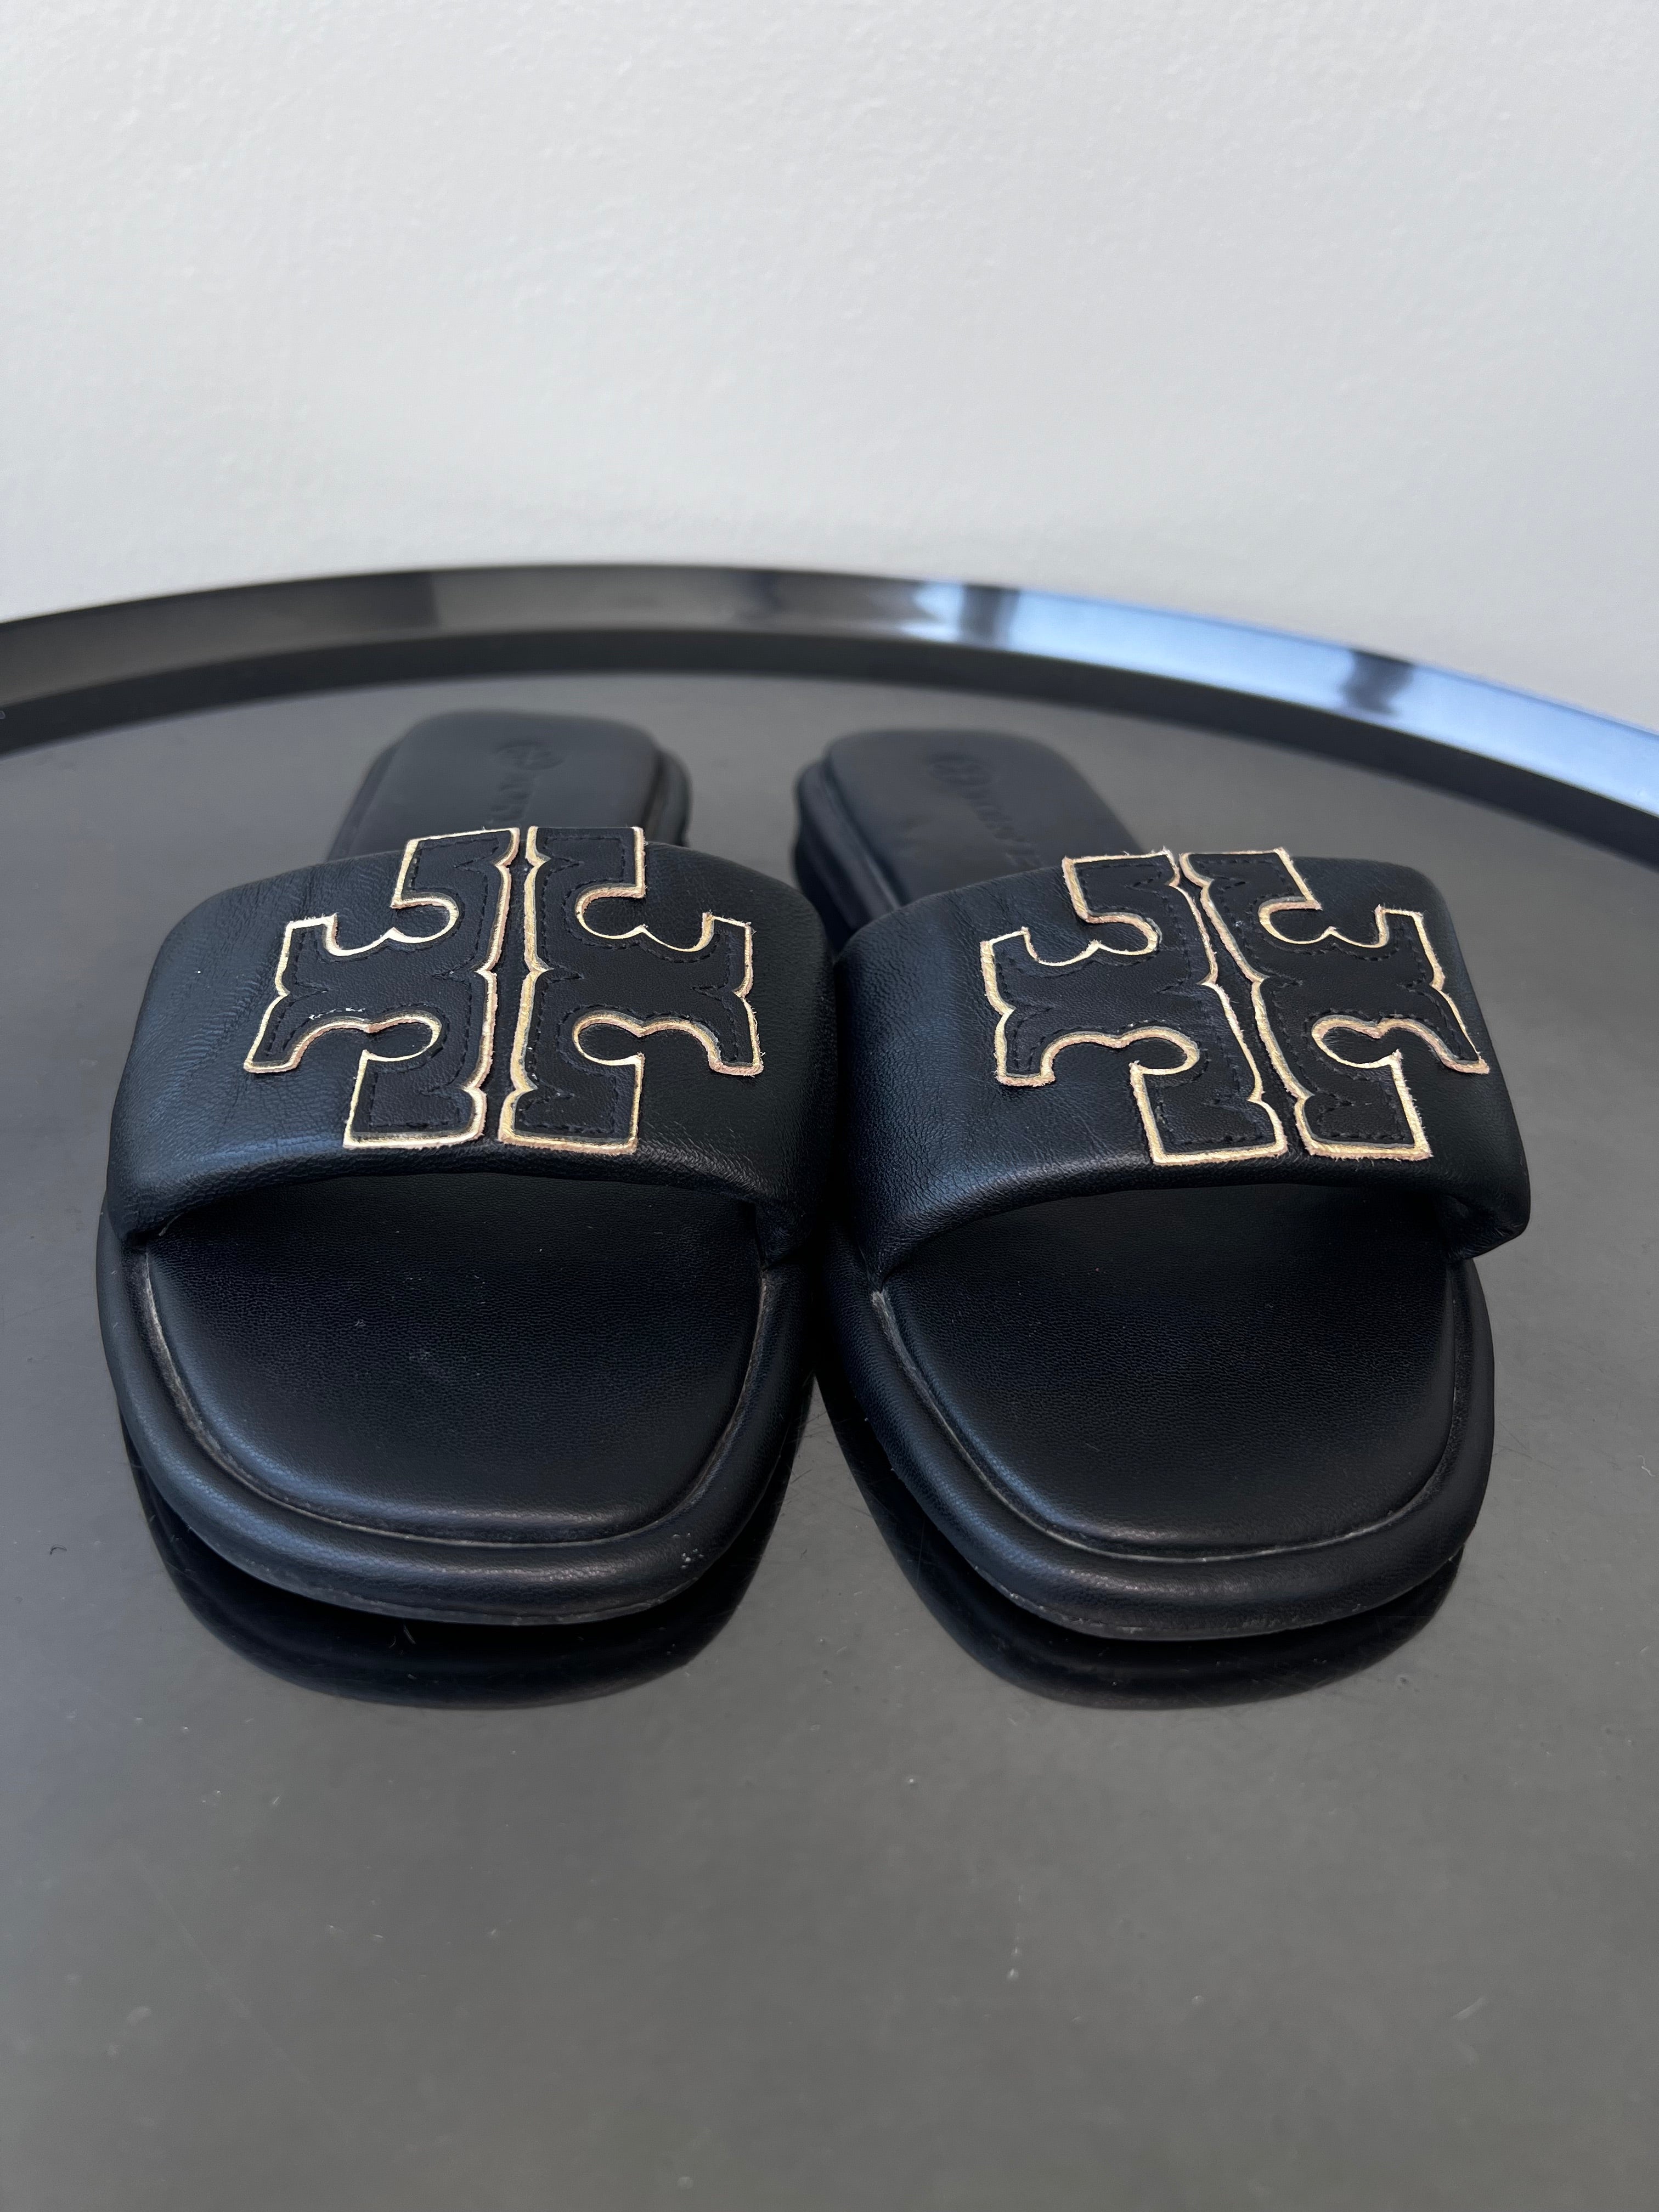 Black leather slides with TB gold logo - TORY BURCH